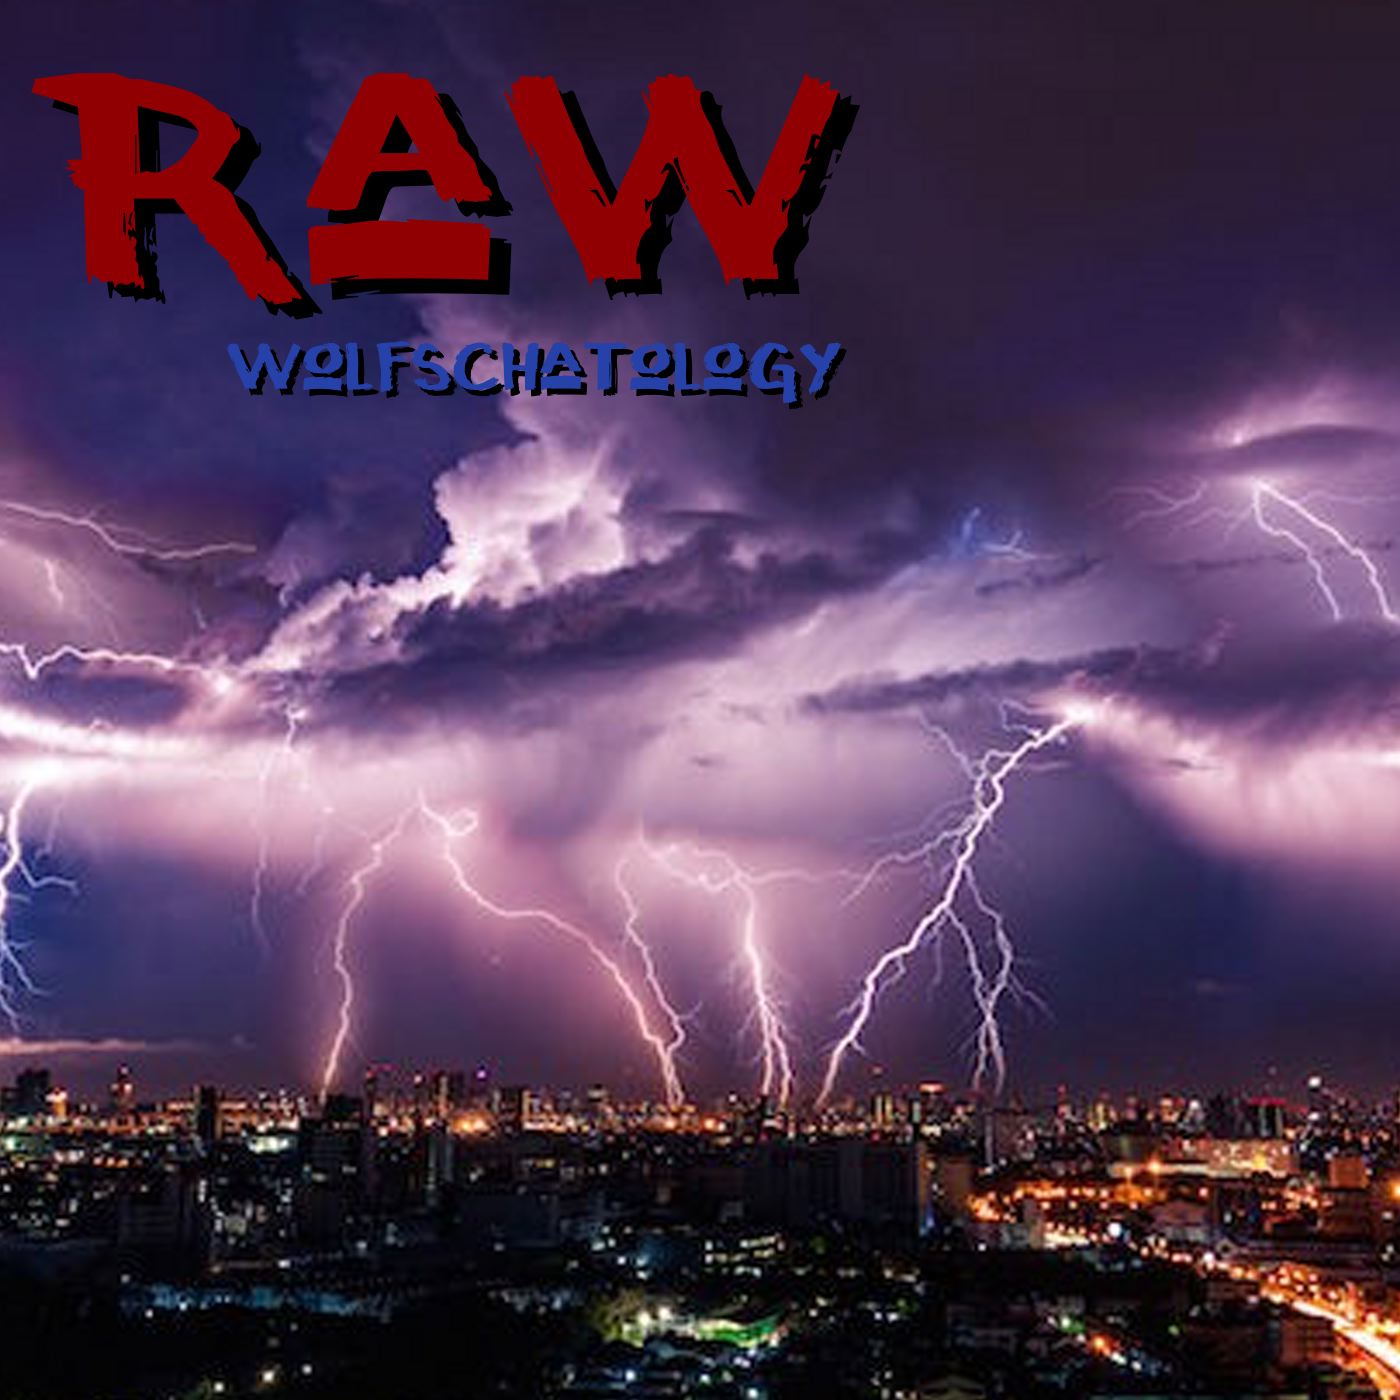 Raw 0043: Wolfschatology: The Sign of Not Knowing